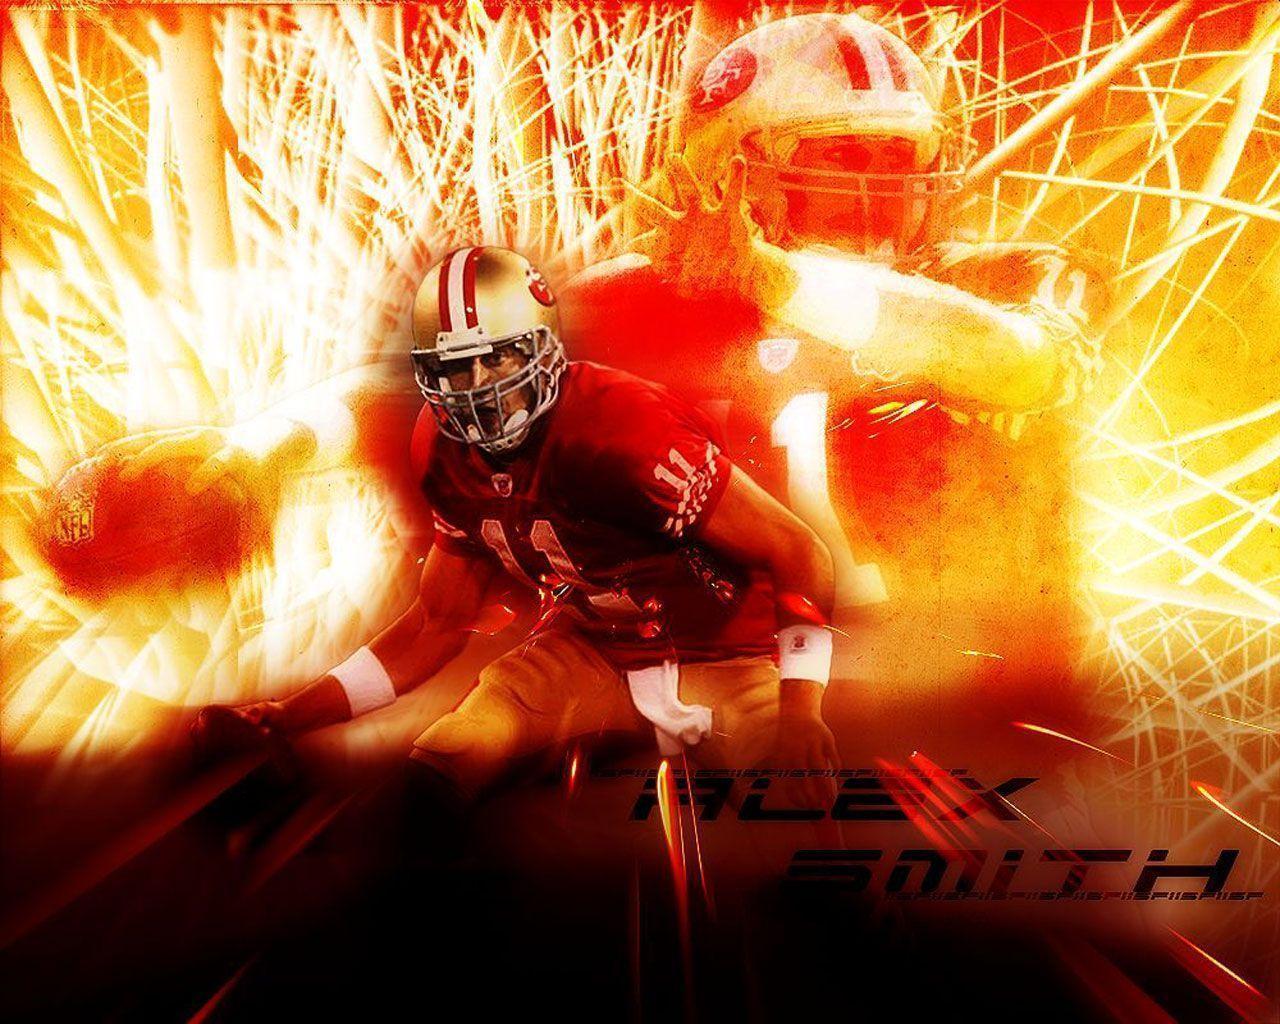 49ers Backgrounds - Wallpaper Cave